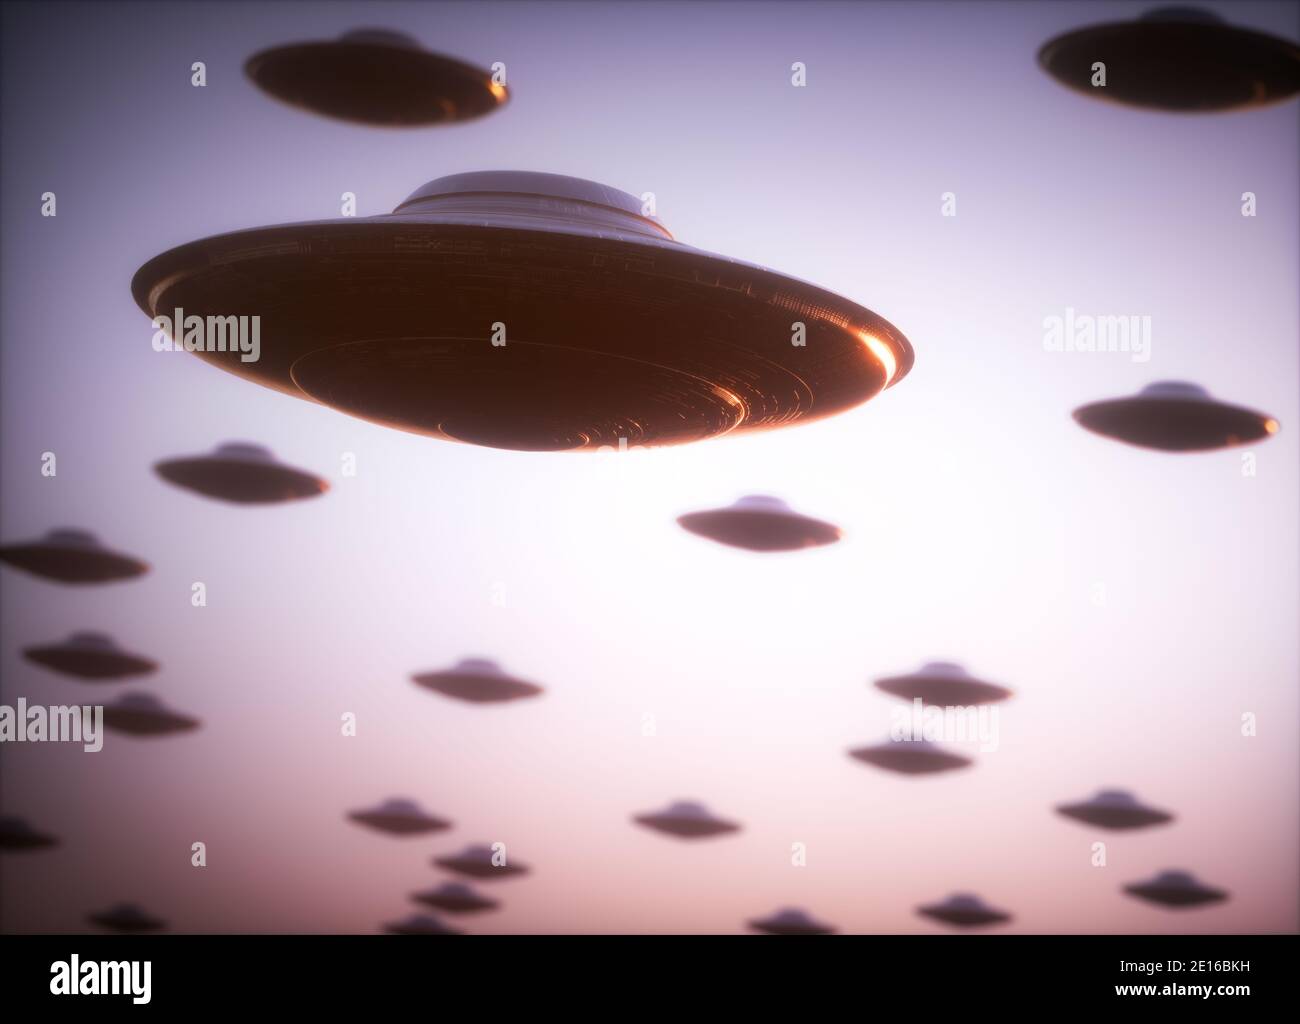 Unidentified flying object attack. 3D illustration of several alien spaceships invading planet earth. Stock Photo